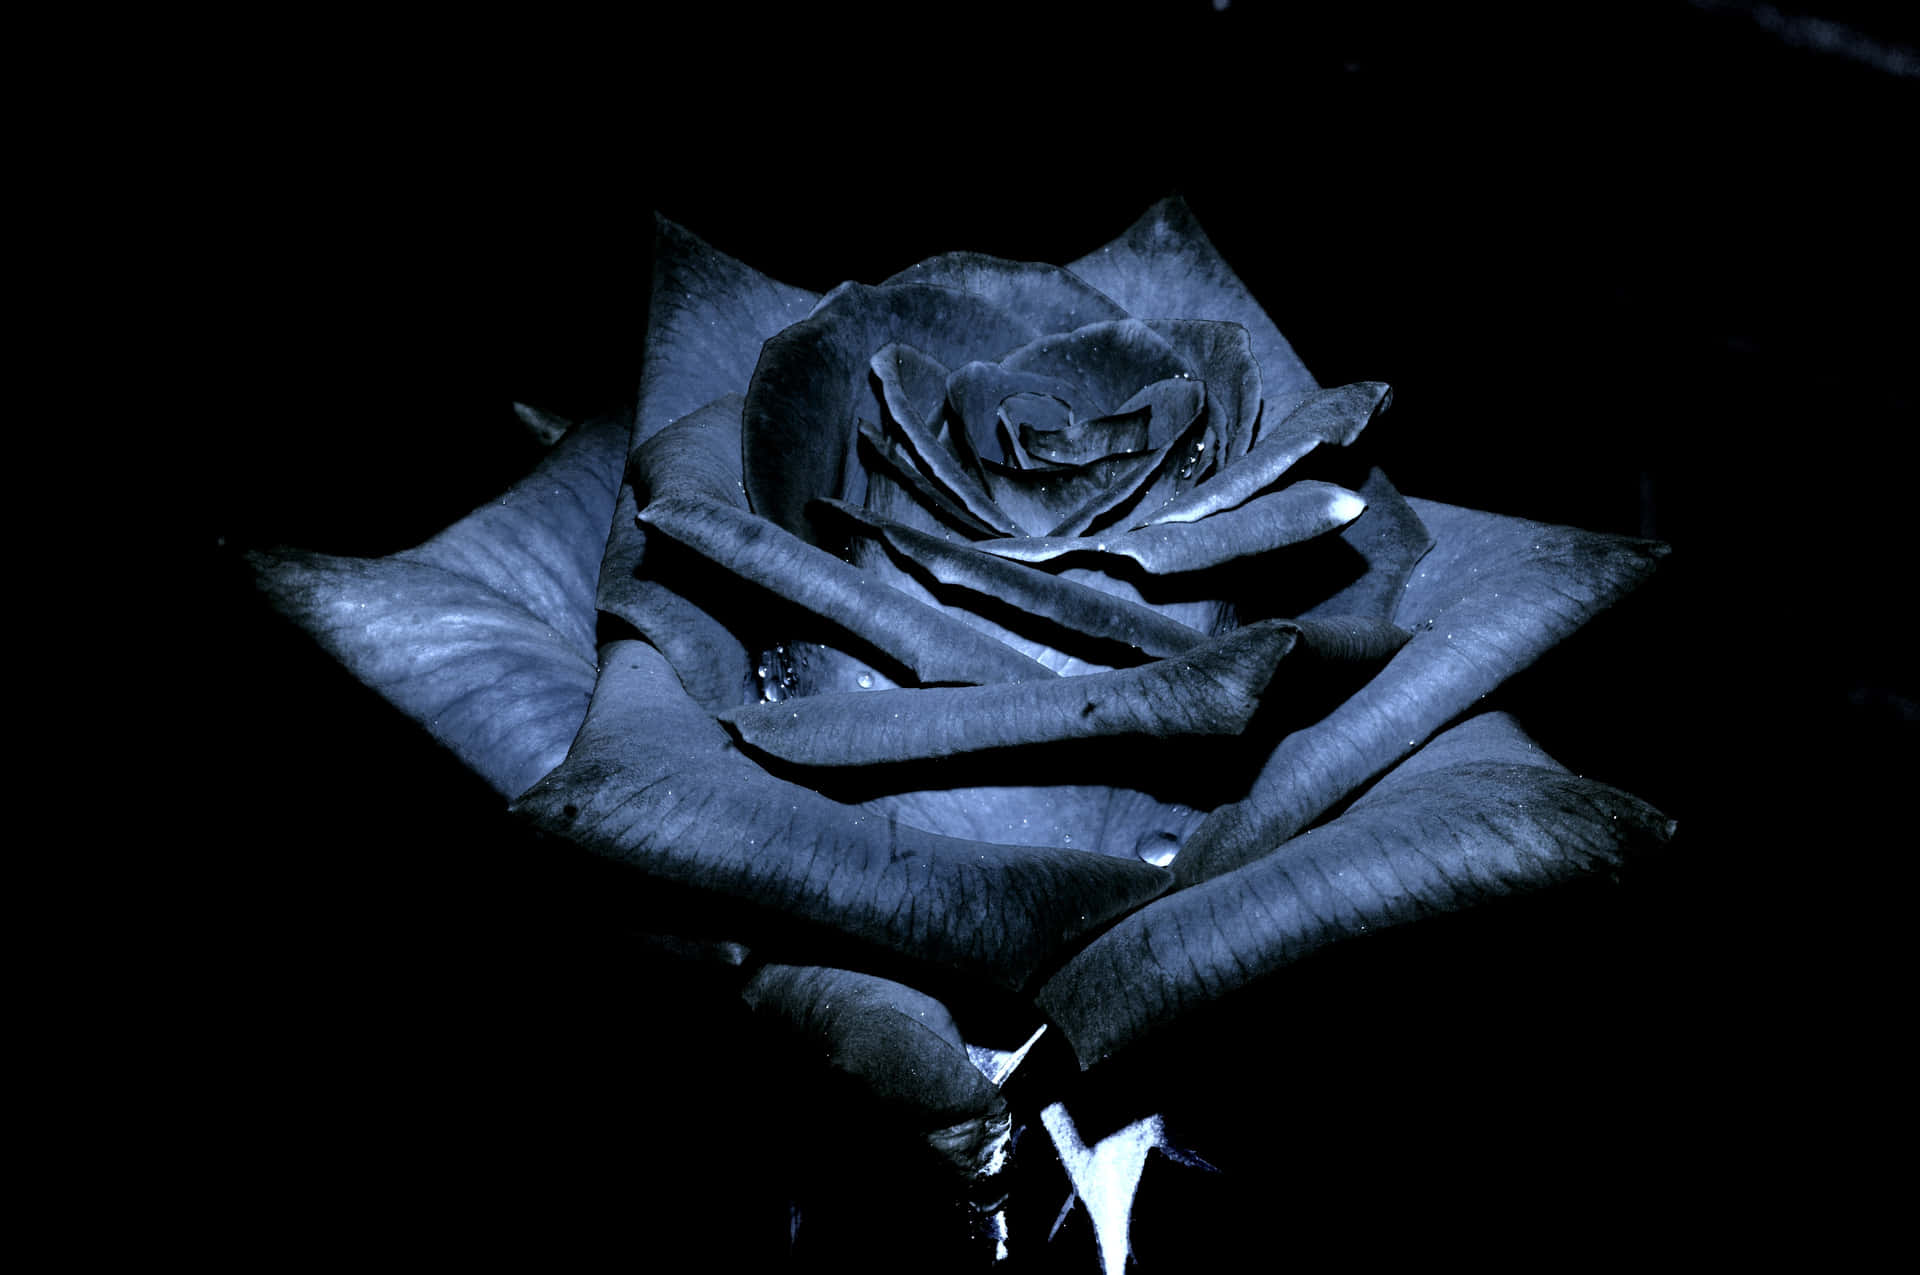 A Black Rose Is Shown In The Dark